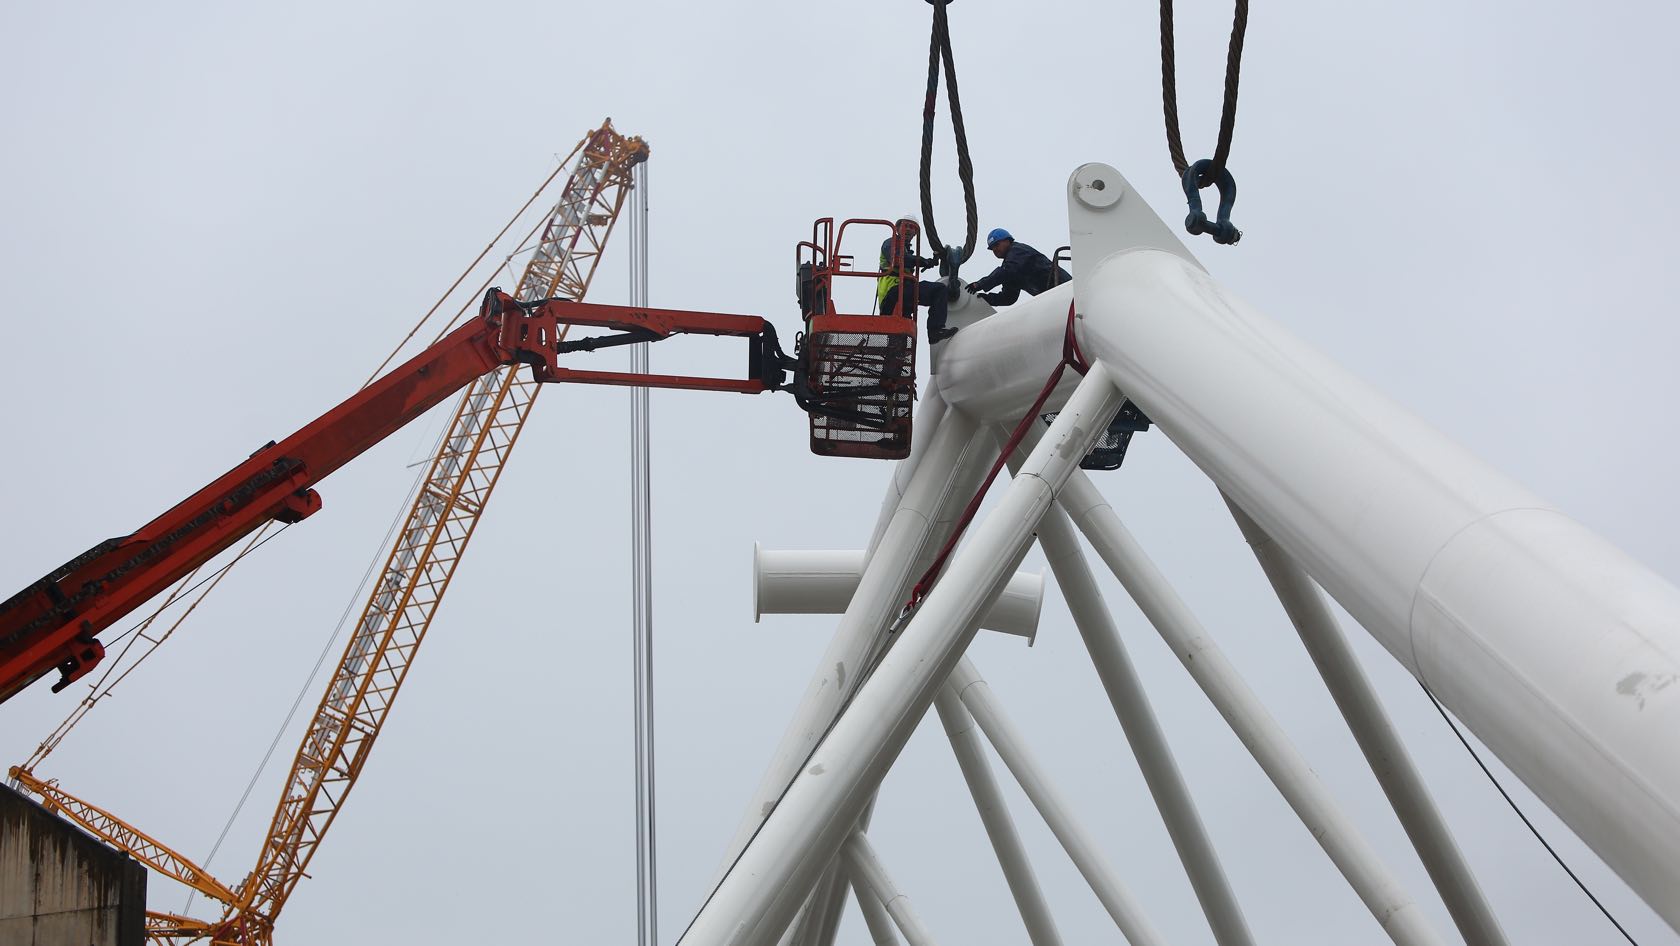 Lifting the structure